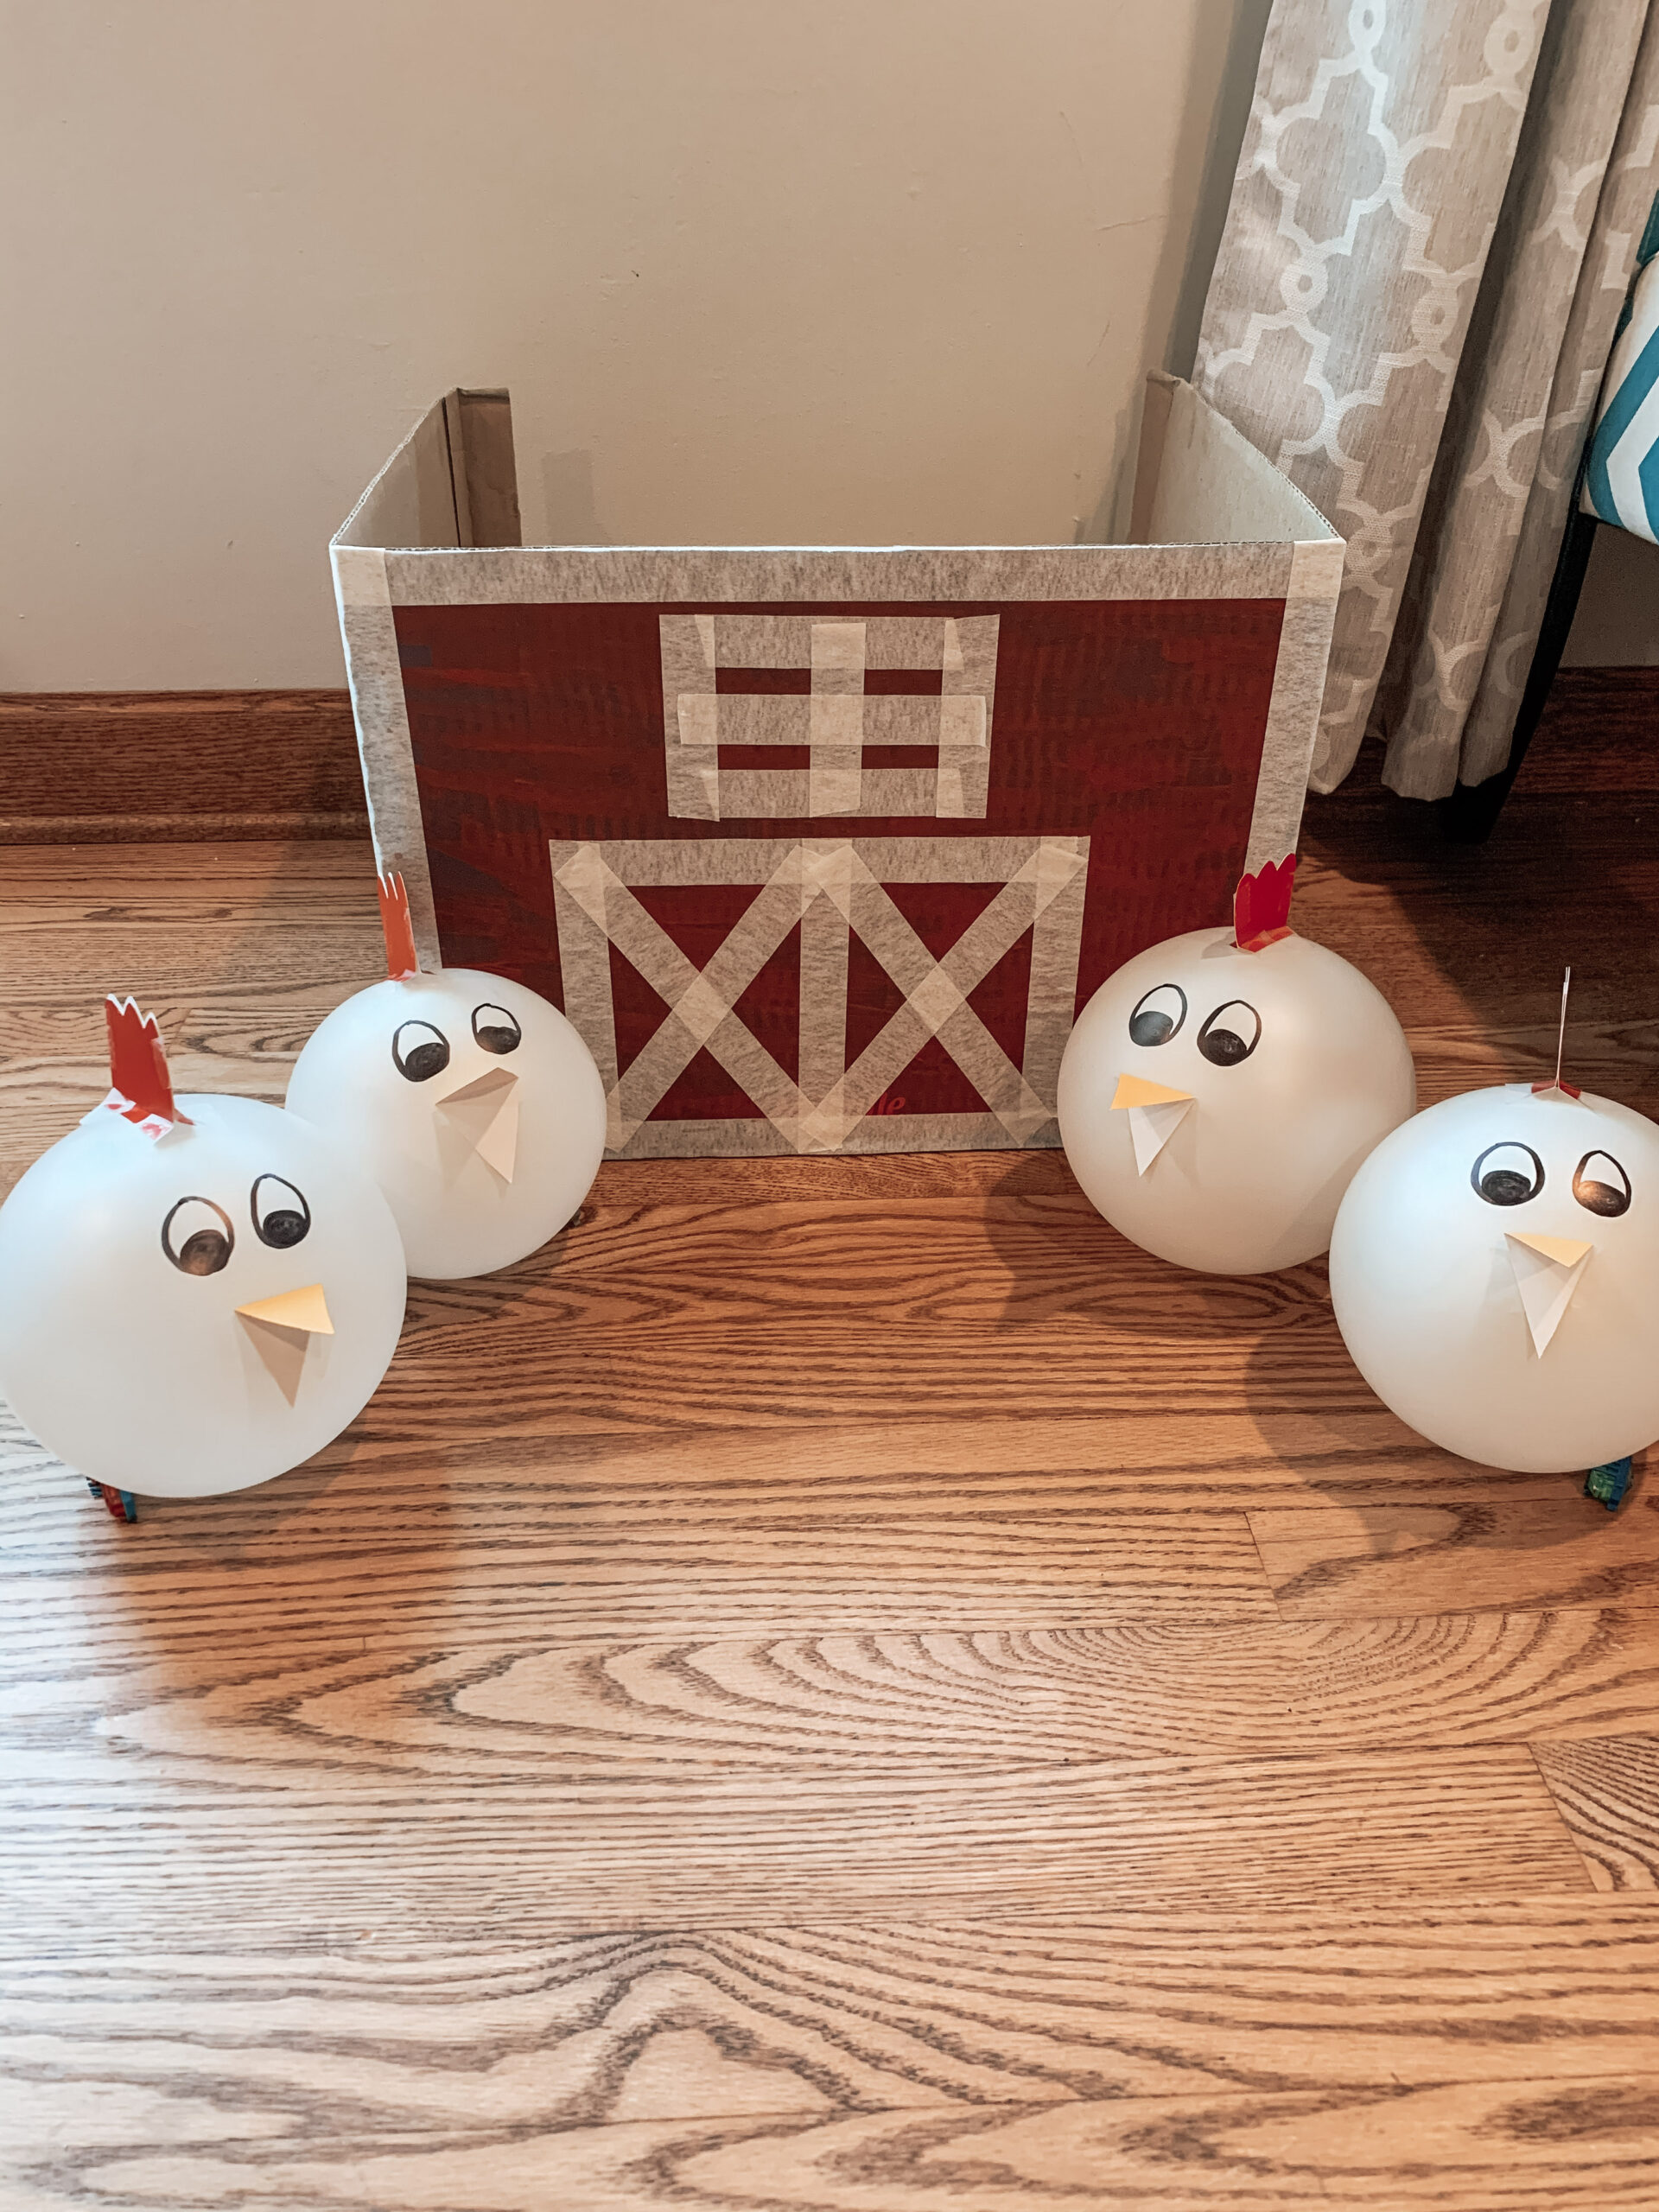 Completed repurposed cardboard kid activity showing the chicken balloons and a cardboard barn